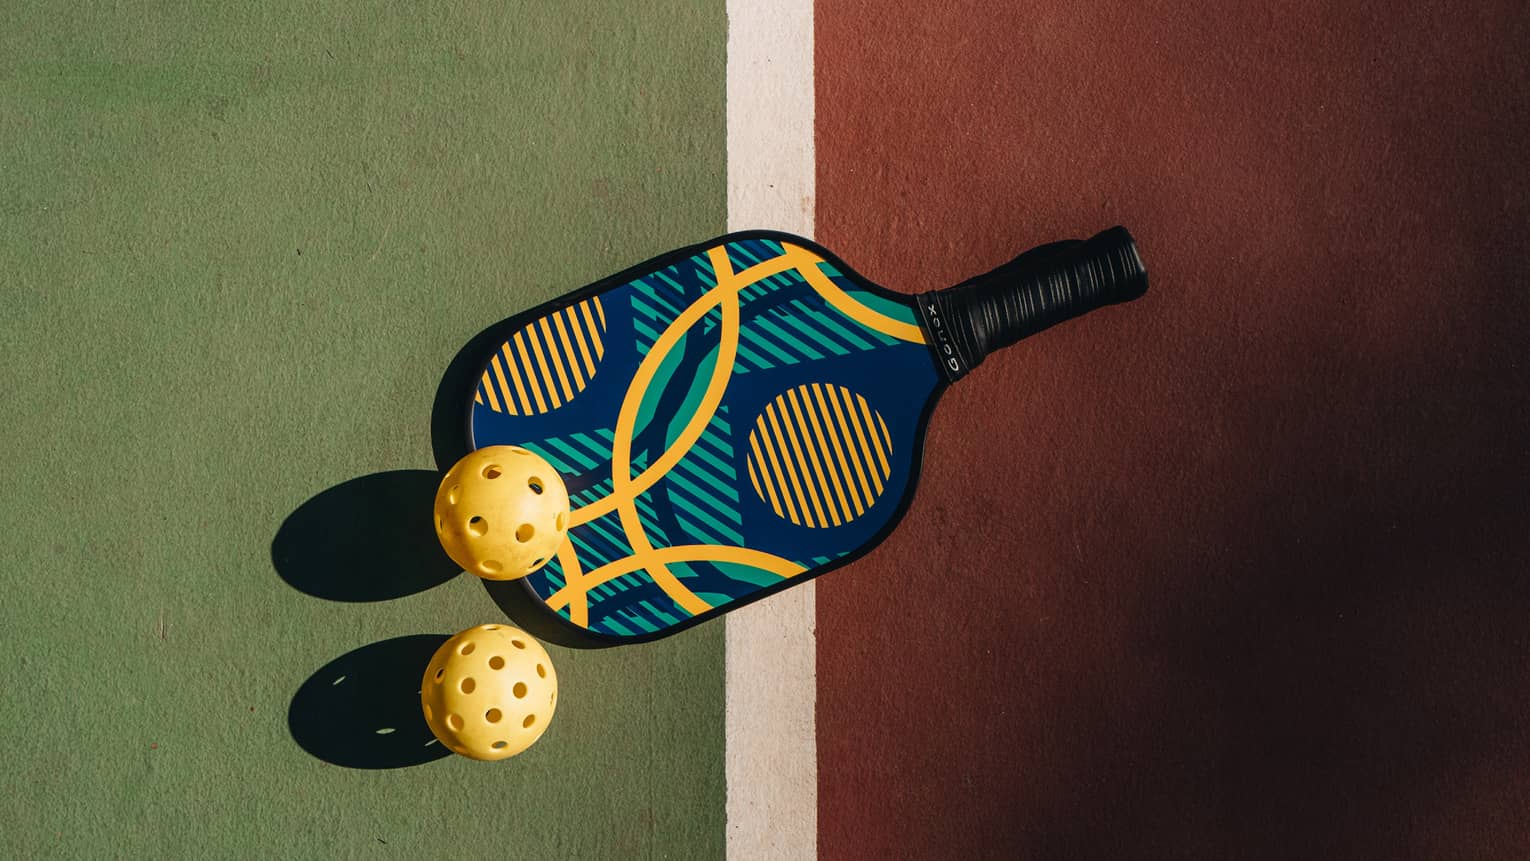 A colourful pickleball racquet and two yellow pickleballs cast shadows upon a green and red court with a white dividing line.